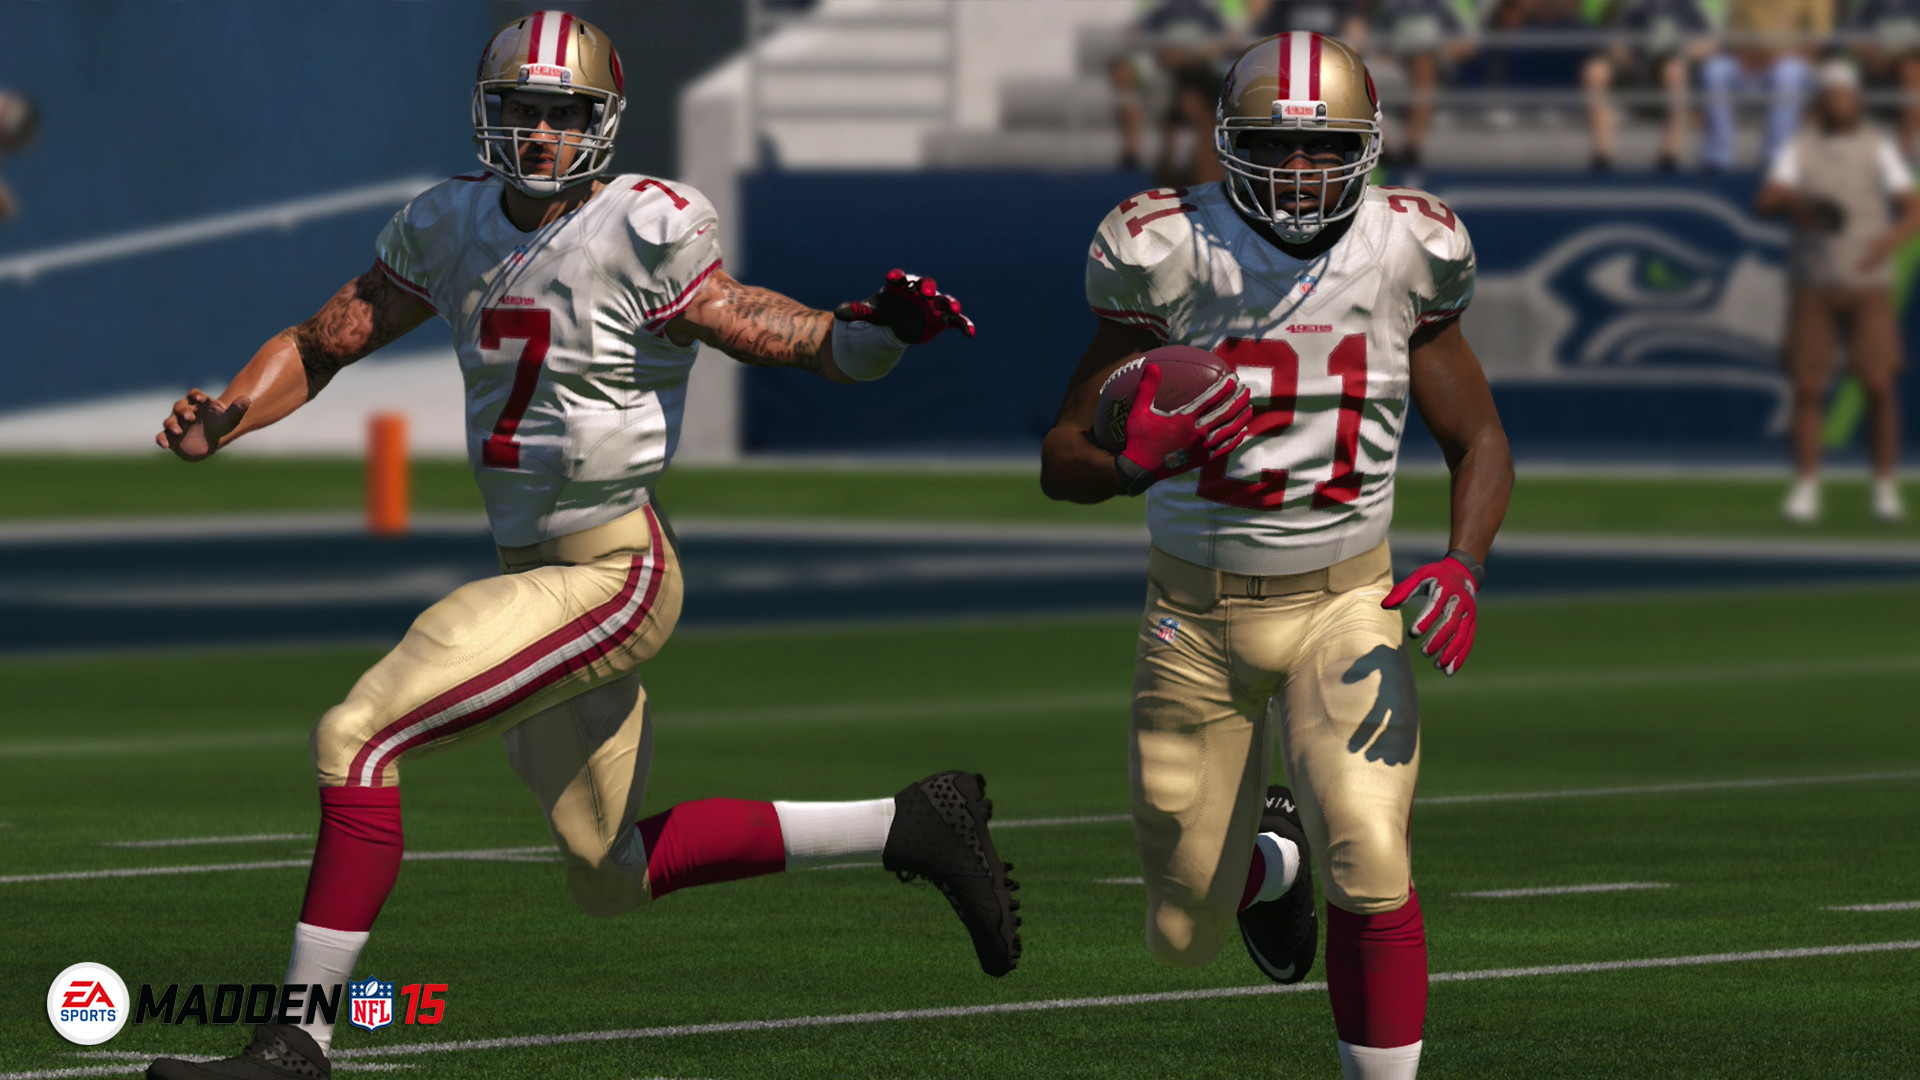 1920x1080 Madden 15 Screenshots Pictures Wallpapers PlayStation 3 IGN 